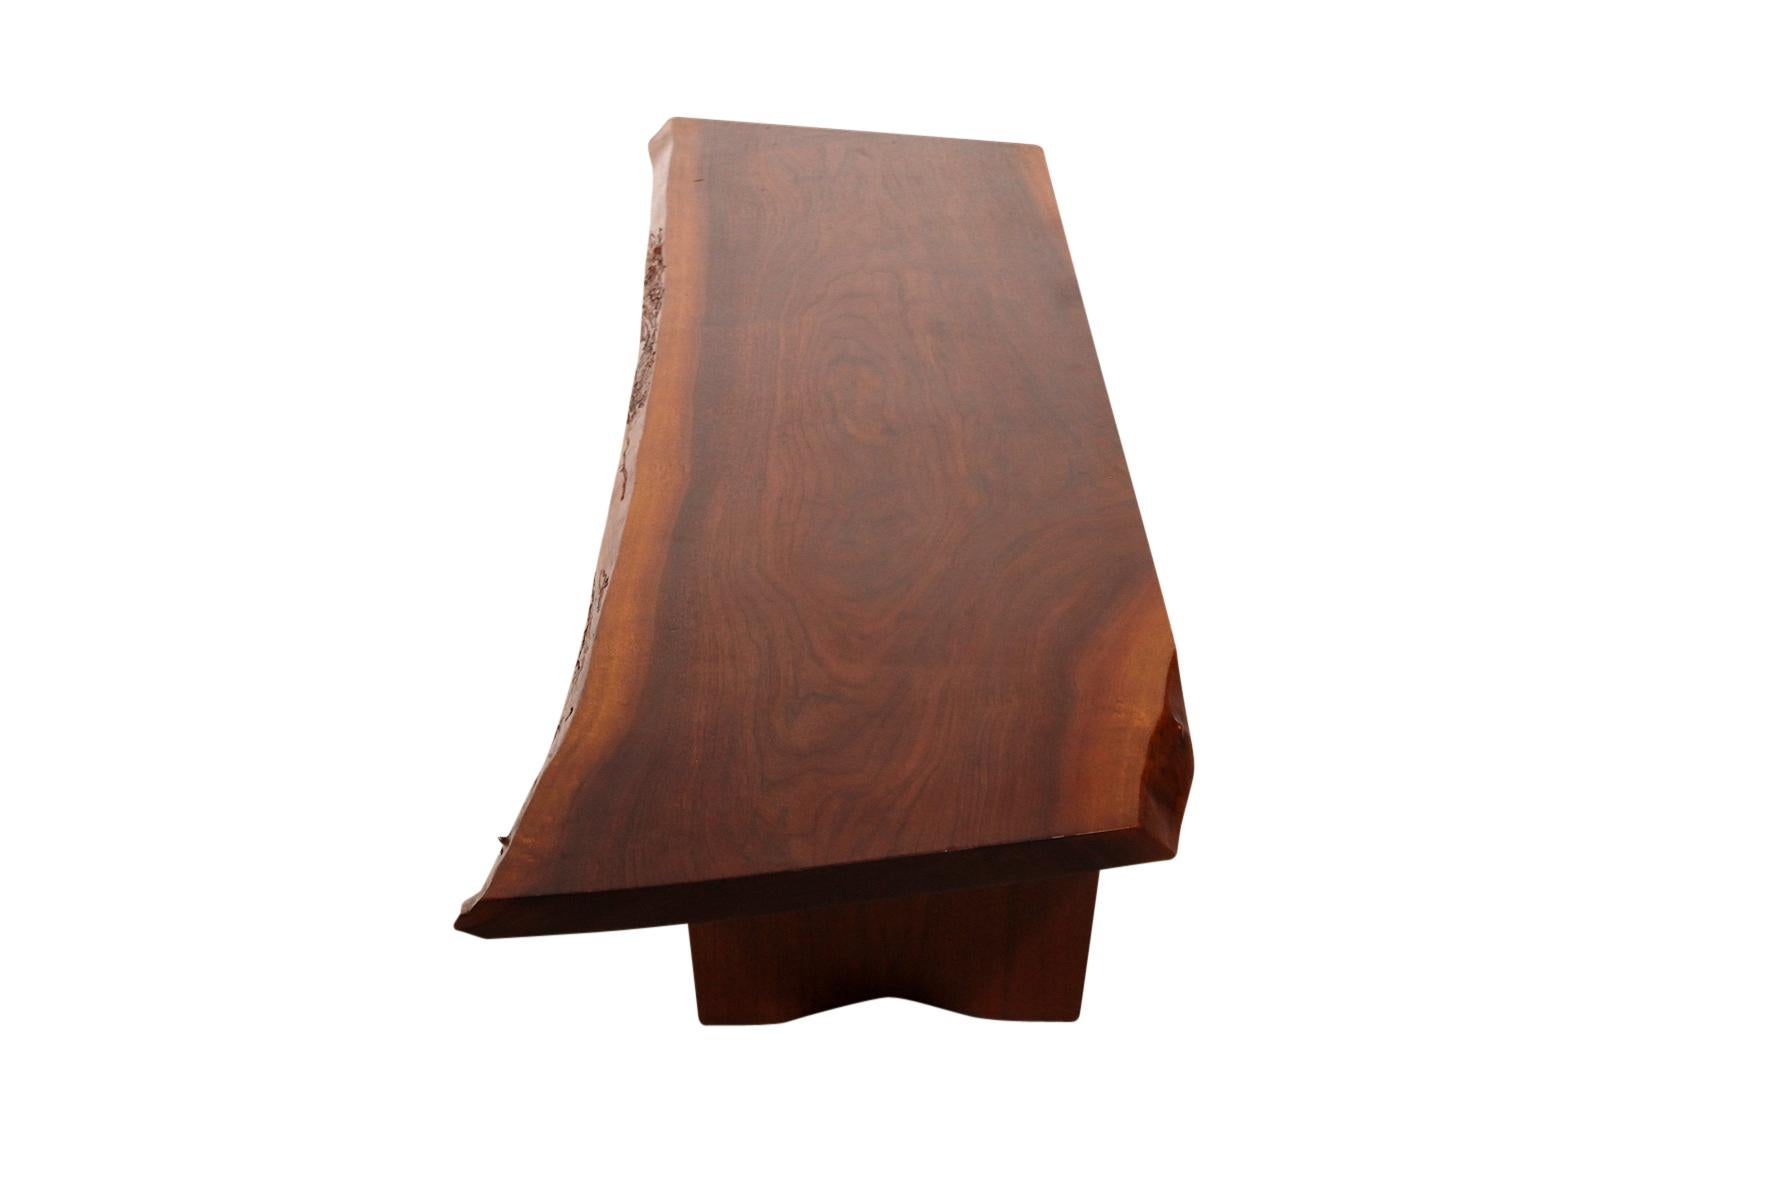 American Free Edge Bench or Coffee Table by George Nakashima, 1972